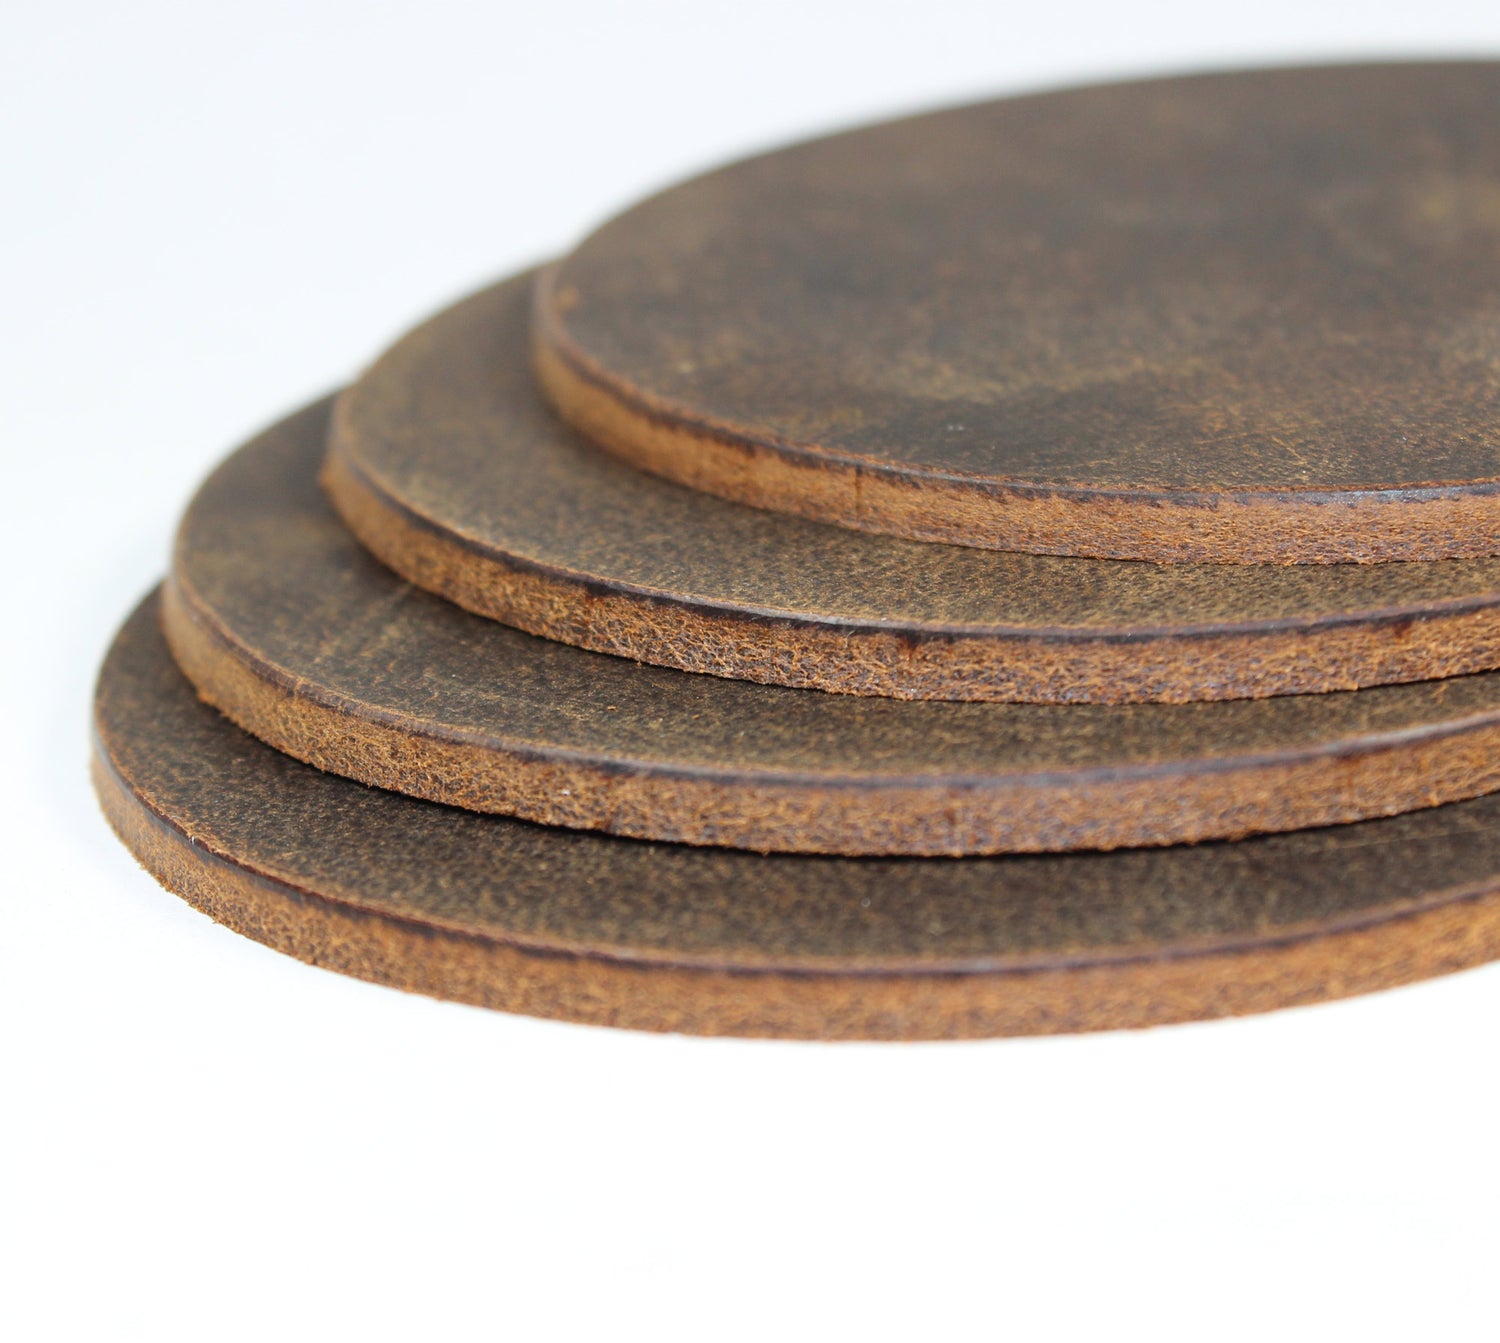 Leather Drink Coasters - 4 Pack